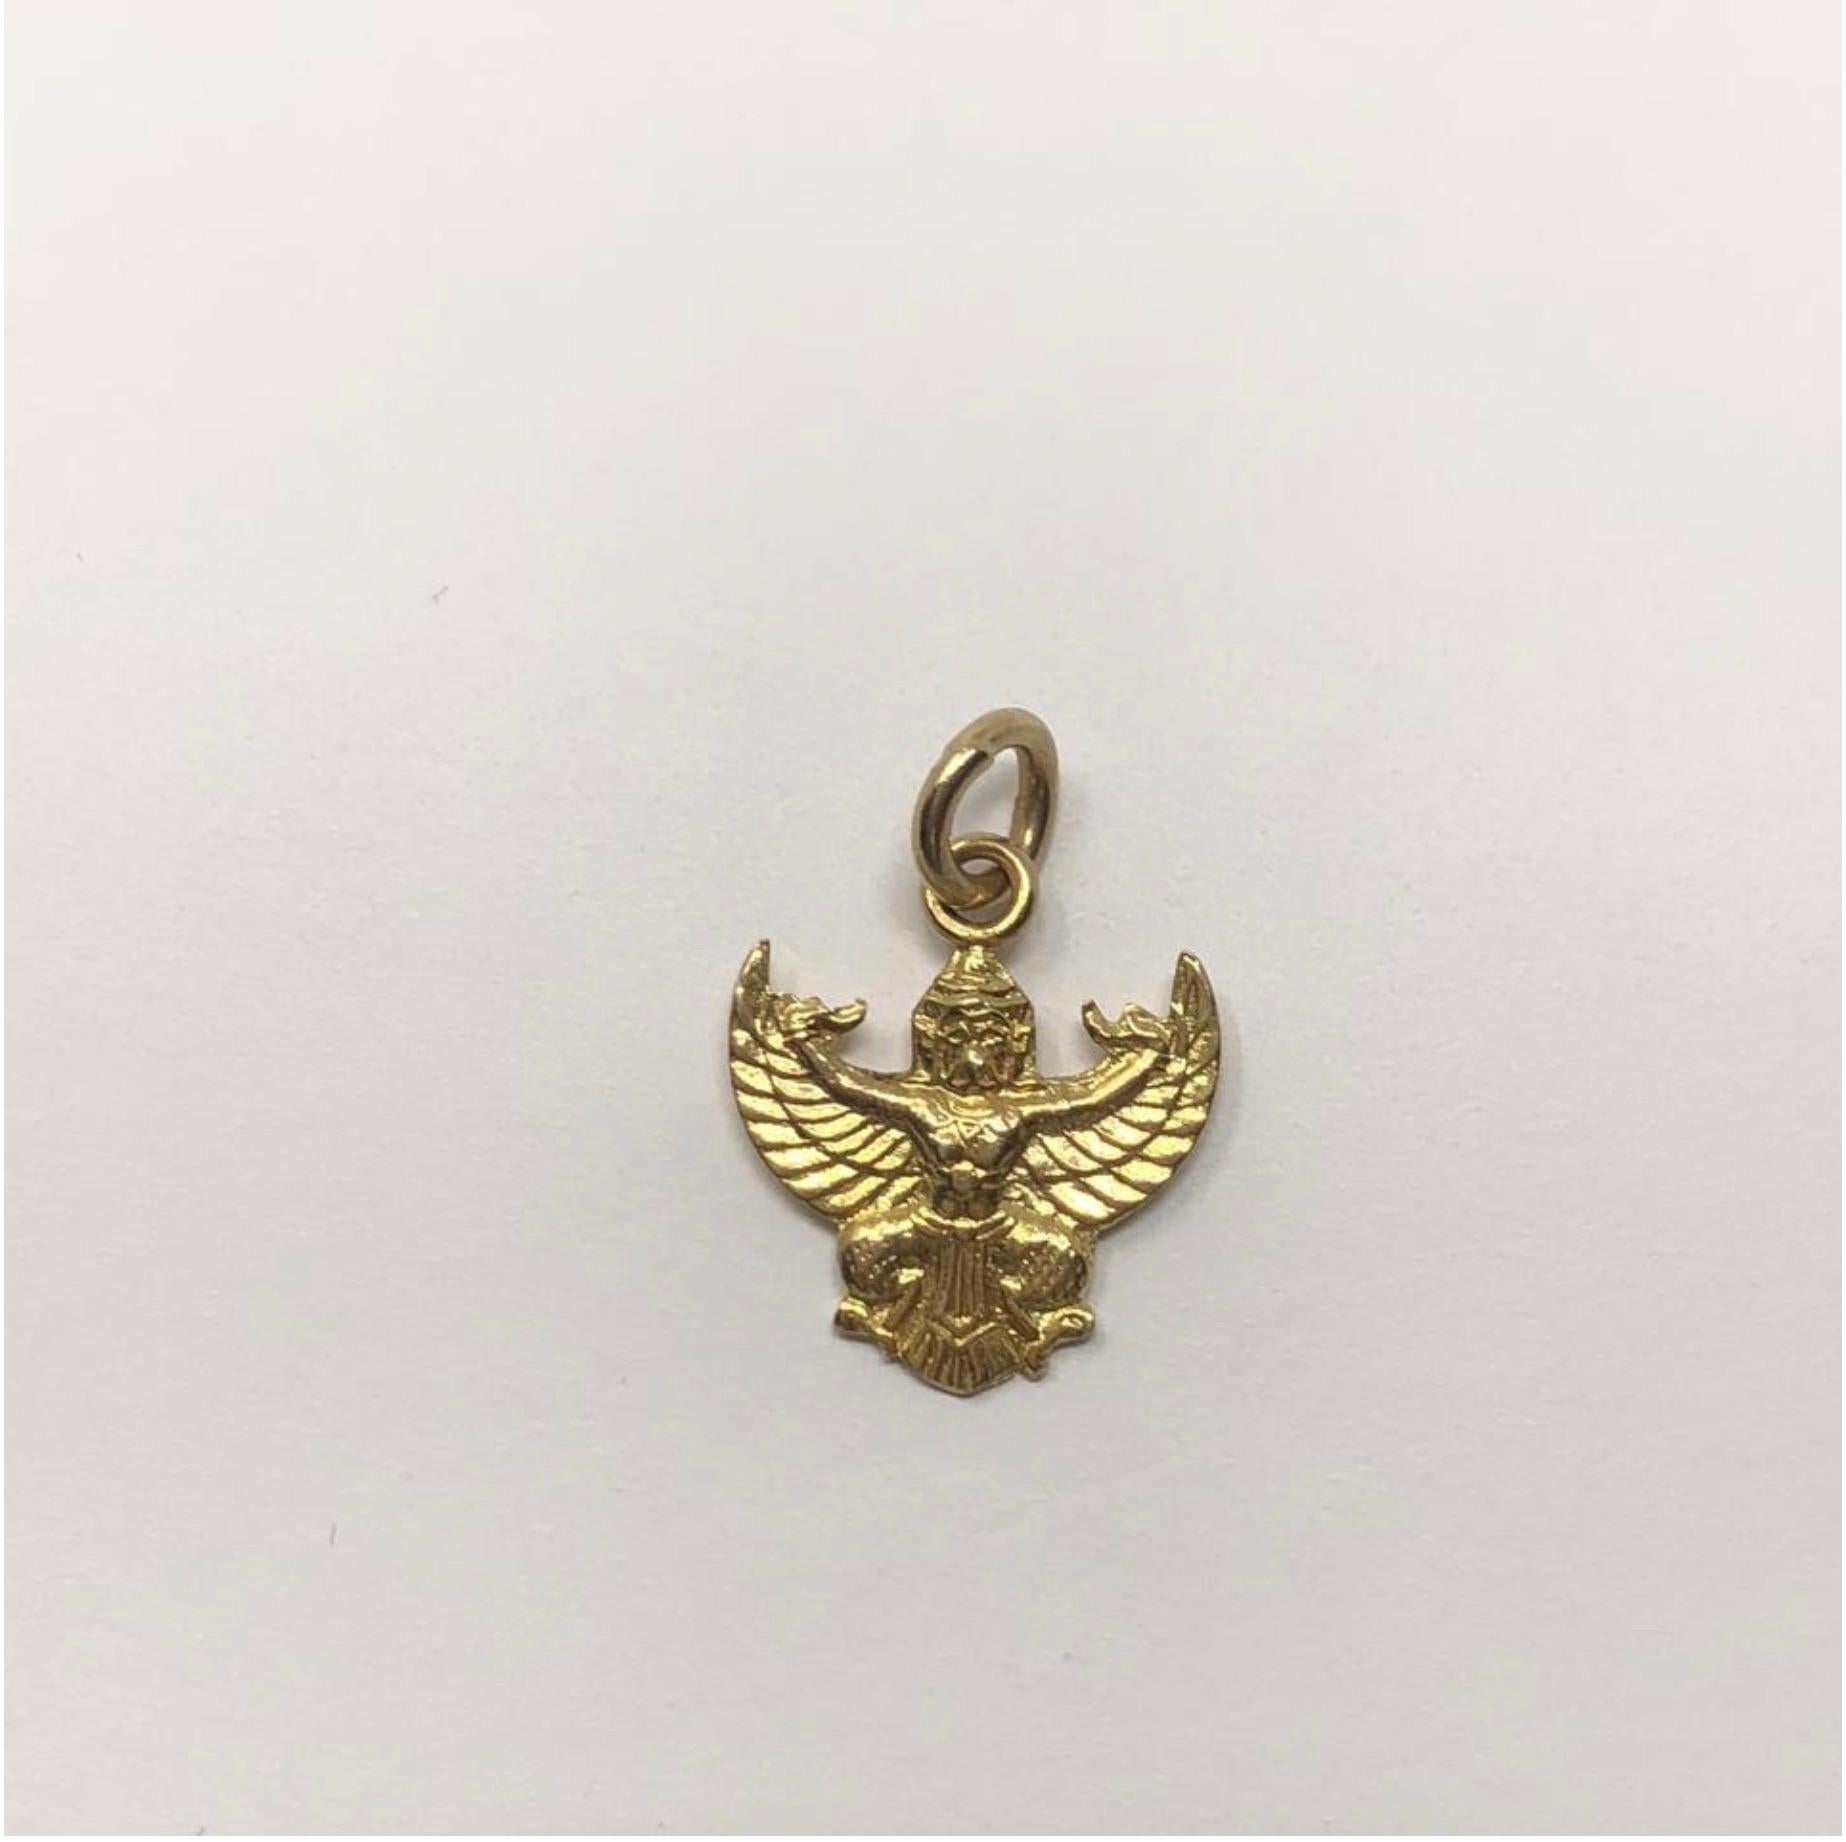 MODEL - Vintage 14k Gold Katchina Dancer with Wings Spread Pendent Charm

CONDITION - Exceptional! No signs of wear.

SKU - 2386-FL

ORIGINAL RETAIL PRICE - 125 + tax

MATERIAL - 14k Gold

WEIGHT - 1.5 grams

DIMENSIONS - L.6 x H.75 (.9 with bail) x